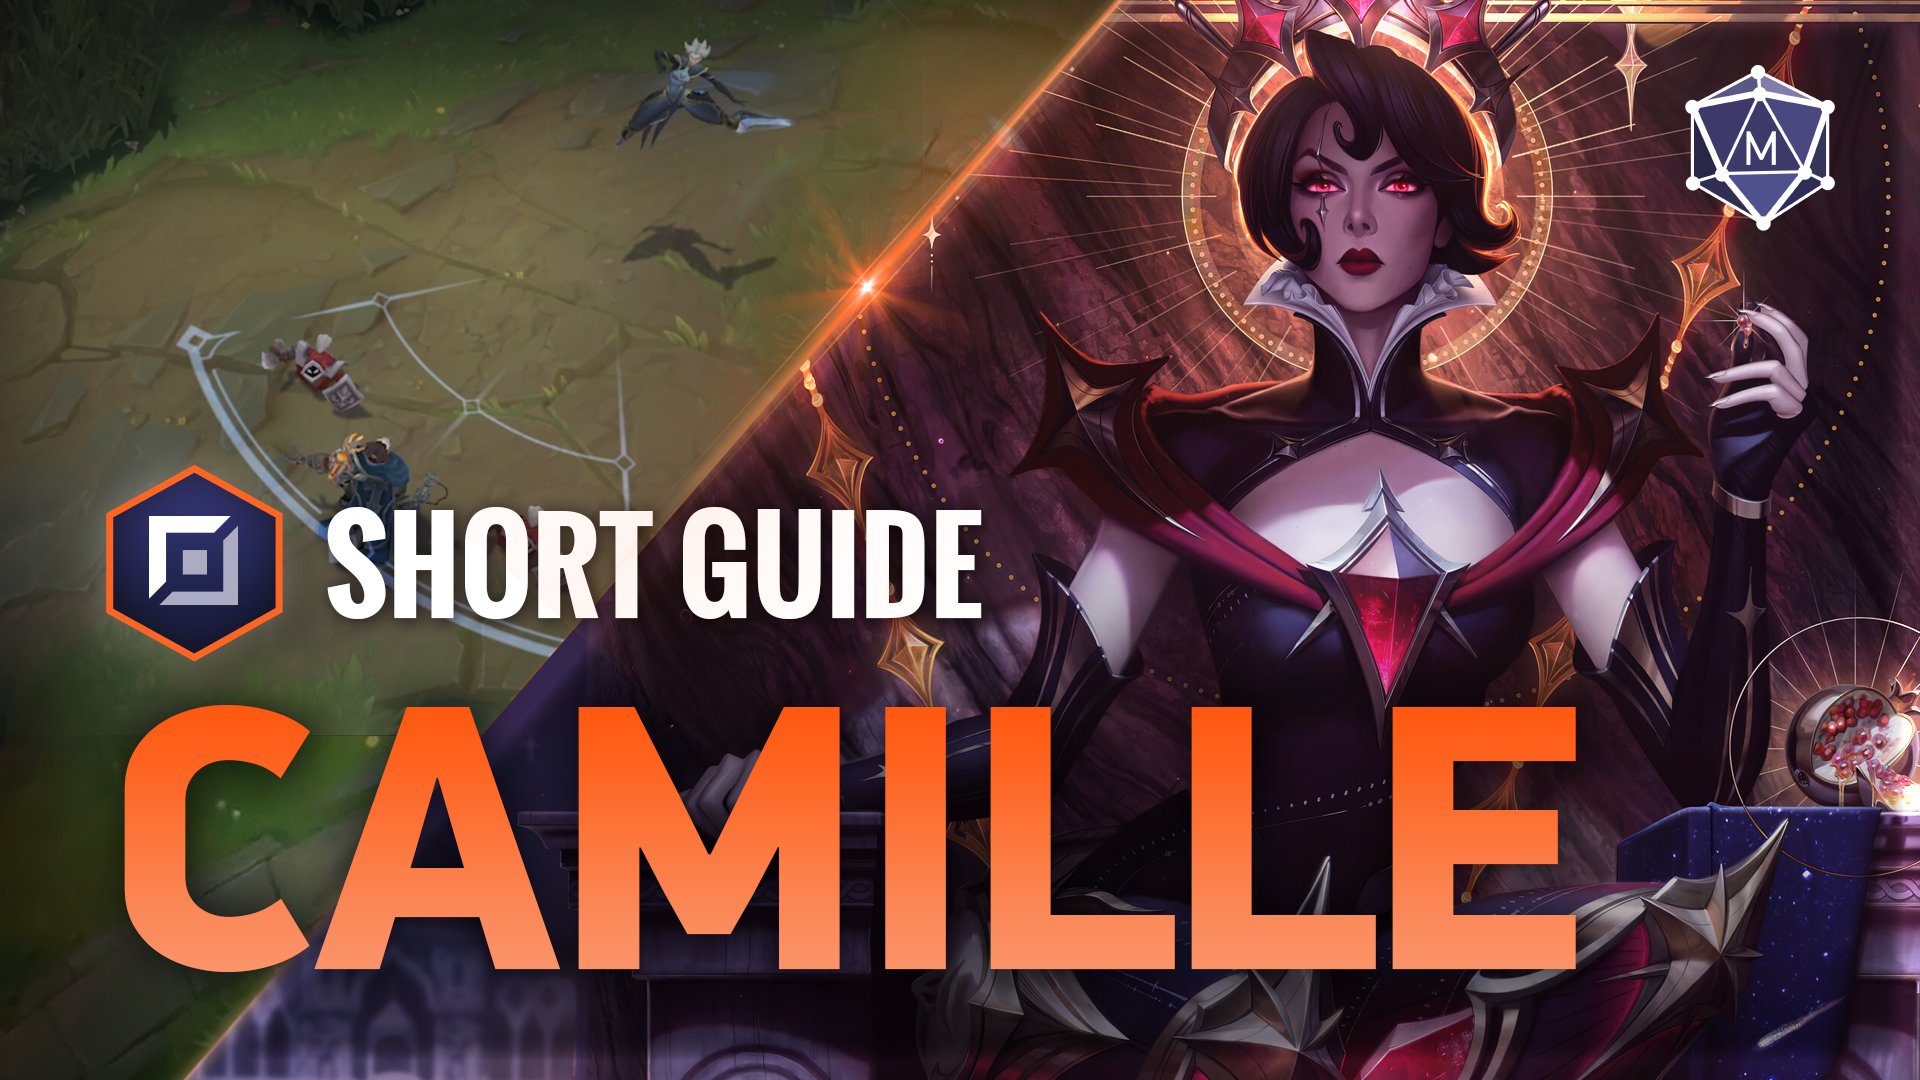 Camille expert guide